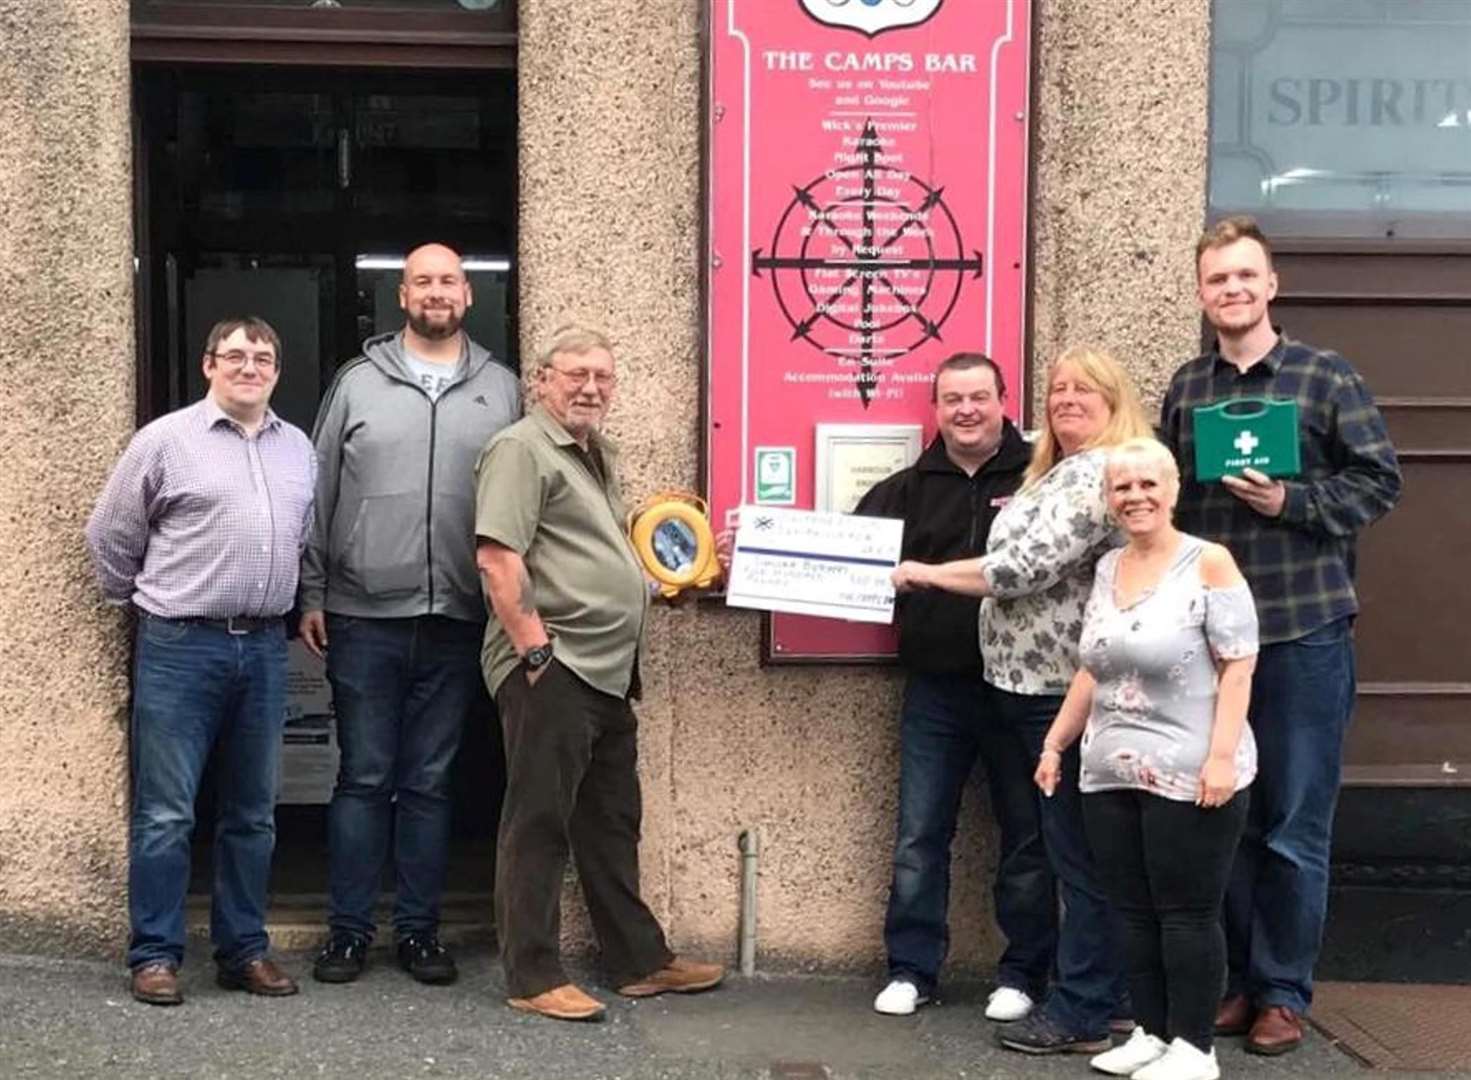 Staff from the Camps Bar present a £500 cheque to Graeme Doull from Sinclair Butchers towards the cost of a defibrillator to serve the Pulteneytown side of the town. From left: Callum Reid, Camps Bar owner, Kevin Boyd, door steward/bartender, William Bruce, door steward, Graeme Doull, Sinclair Butchers, Janet Banks, door steward, Shona Gunn, bartender, and Nick Hodgson, door steward.